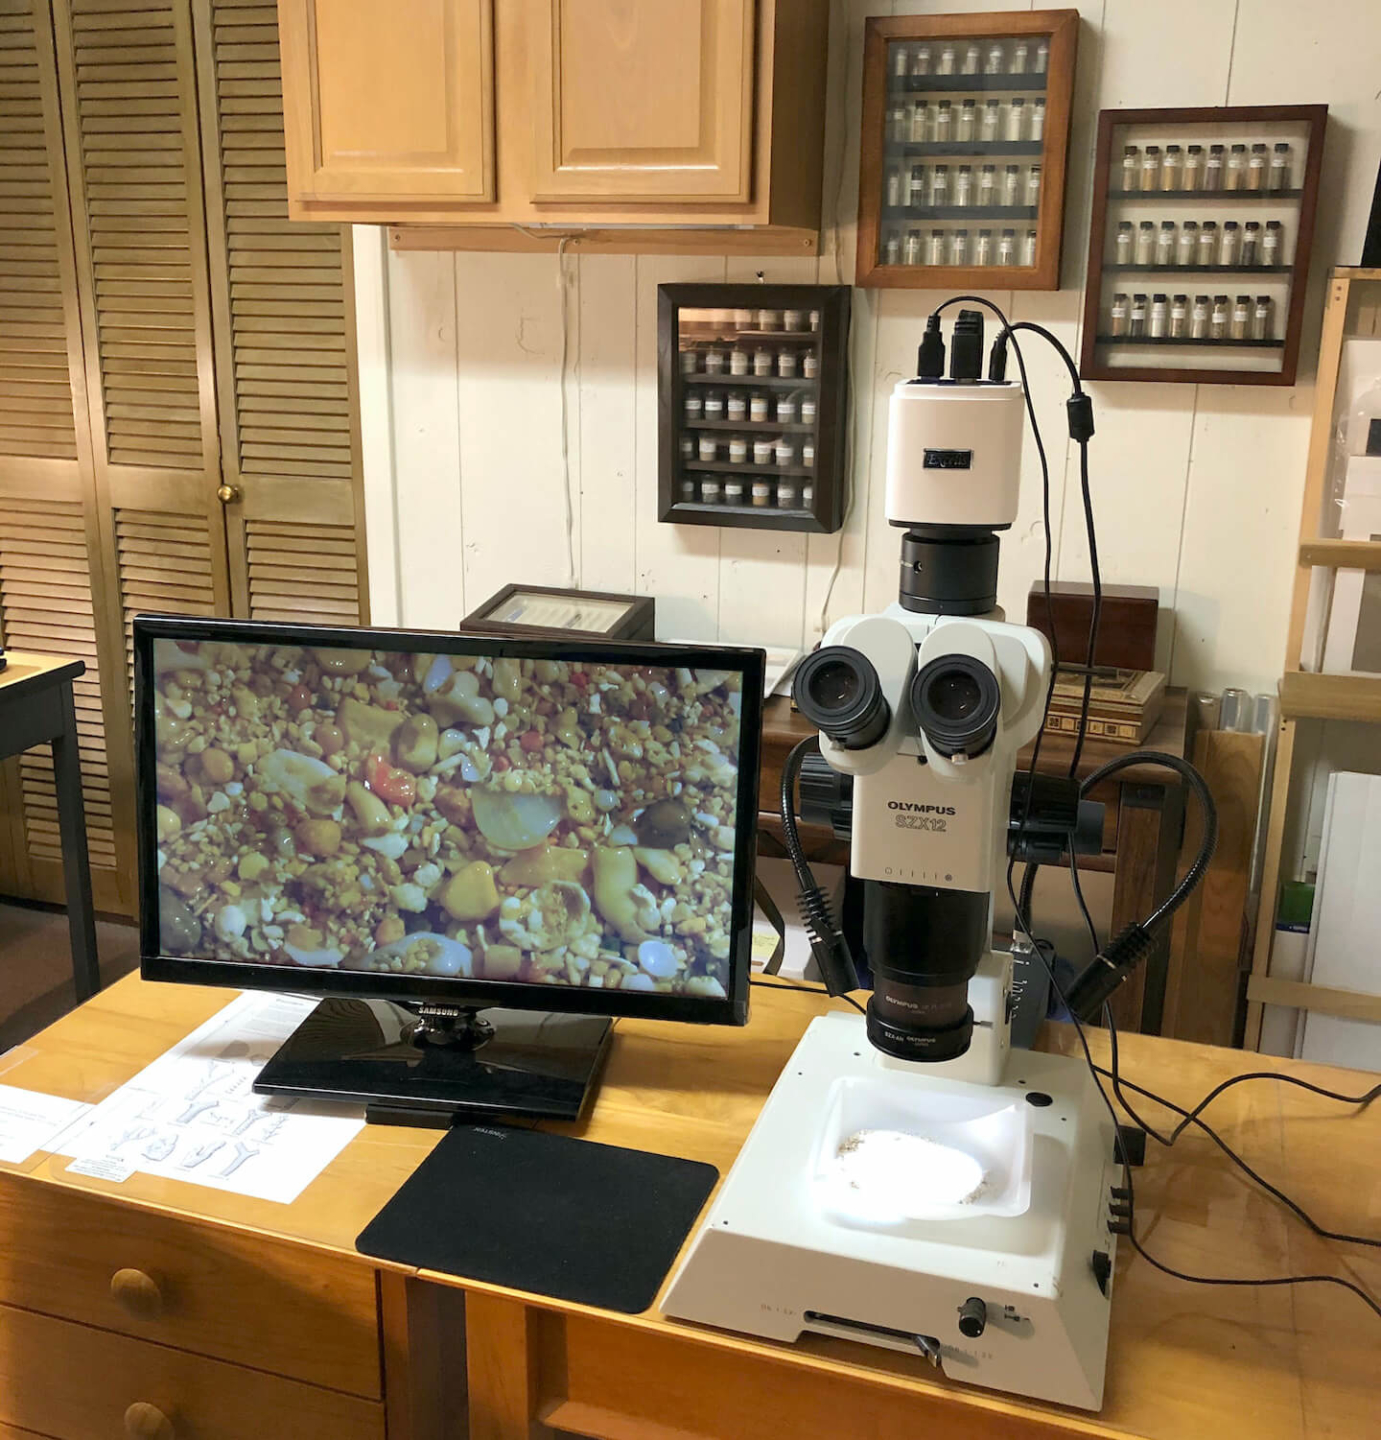 Stereomicroscope Set Up For Photos Of Magnified Sand